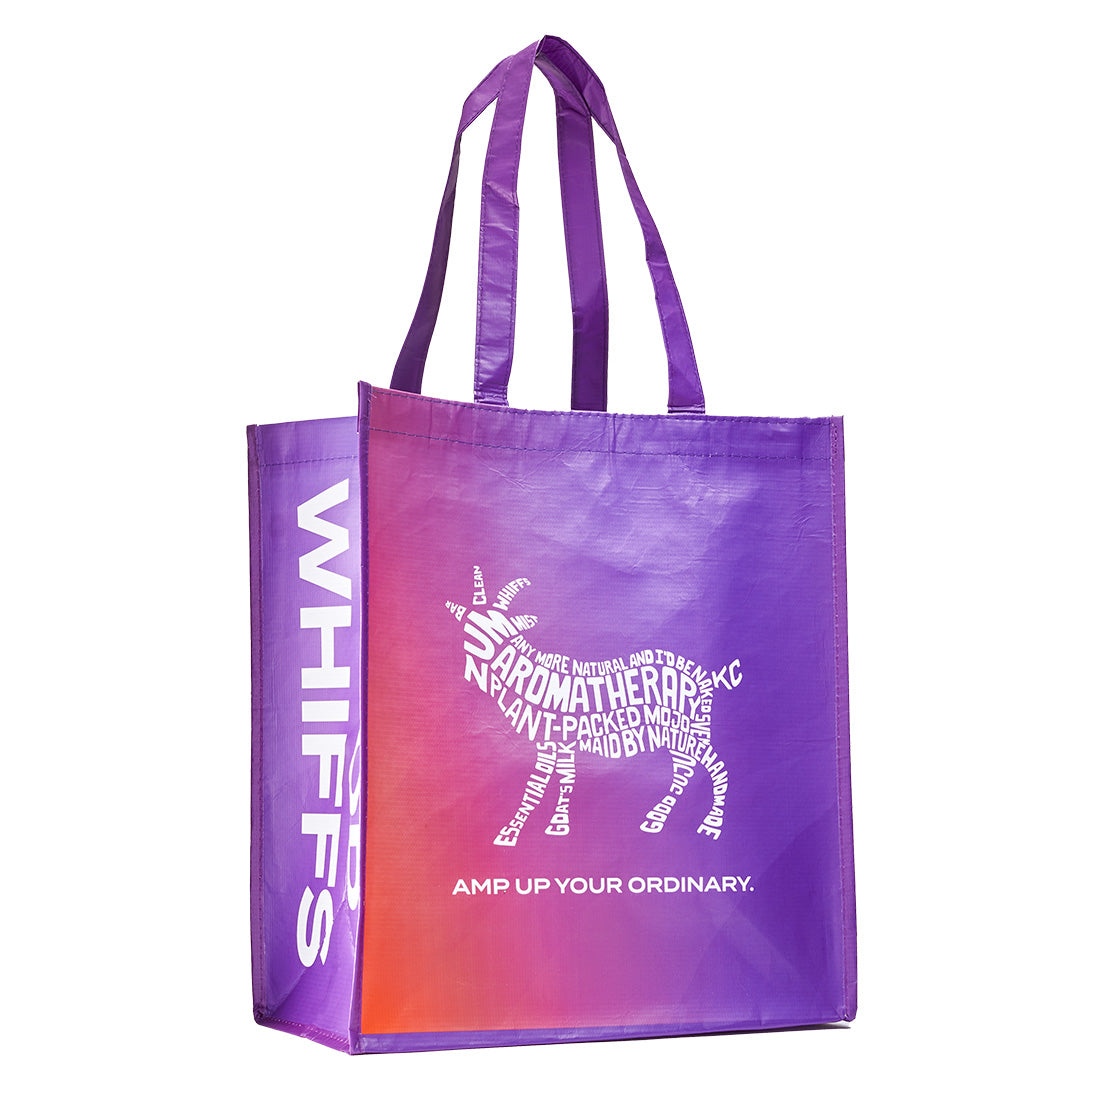 Zum recyclable tote bag at an angle. Goat and the slogan 'Amp Up Your Ordinary.' in the front on an orange to purple gradient. Side of the tote says 'Good Whiffs' on purple background.